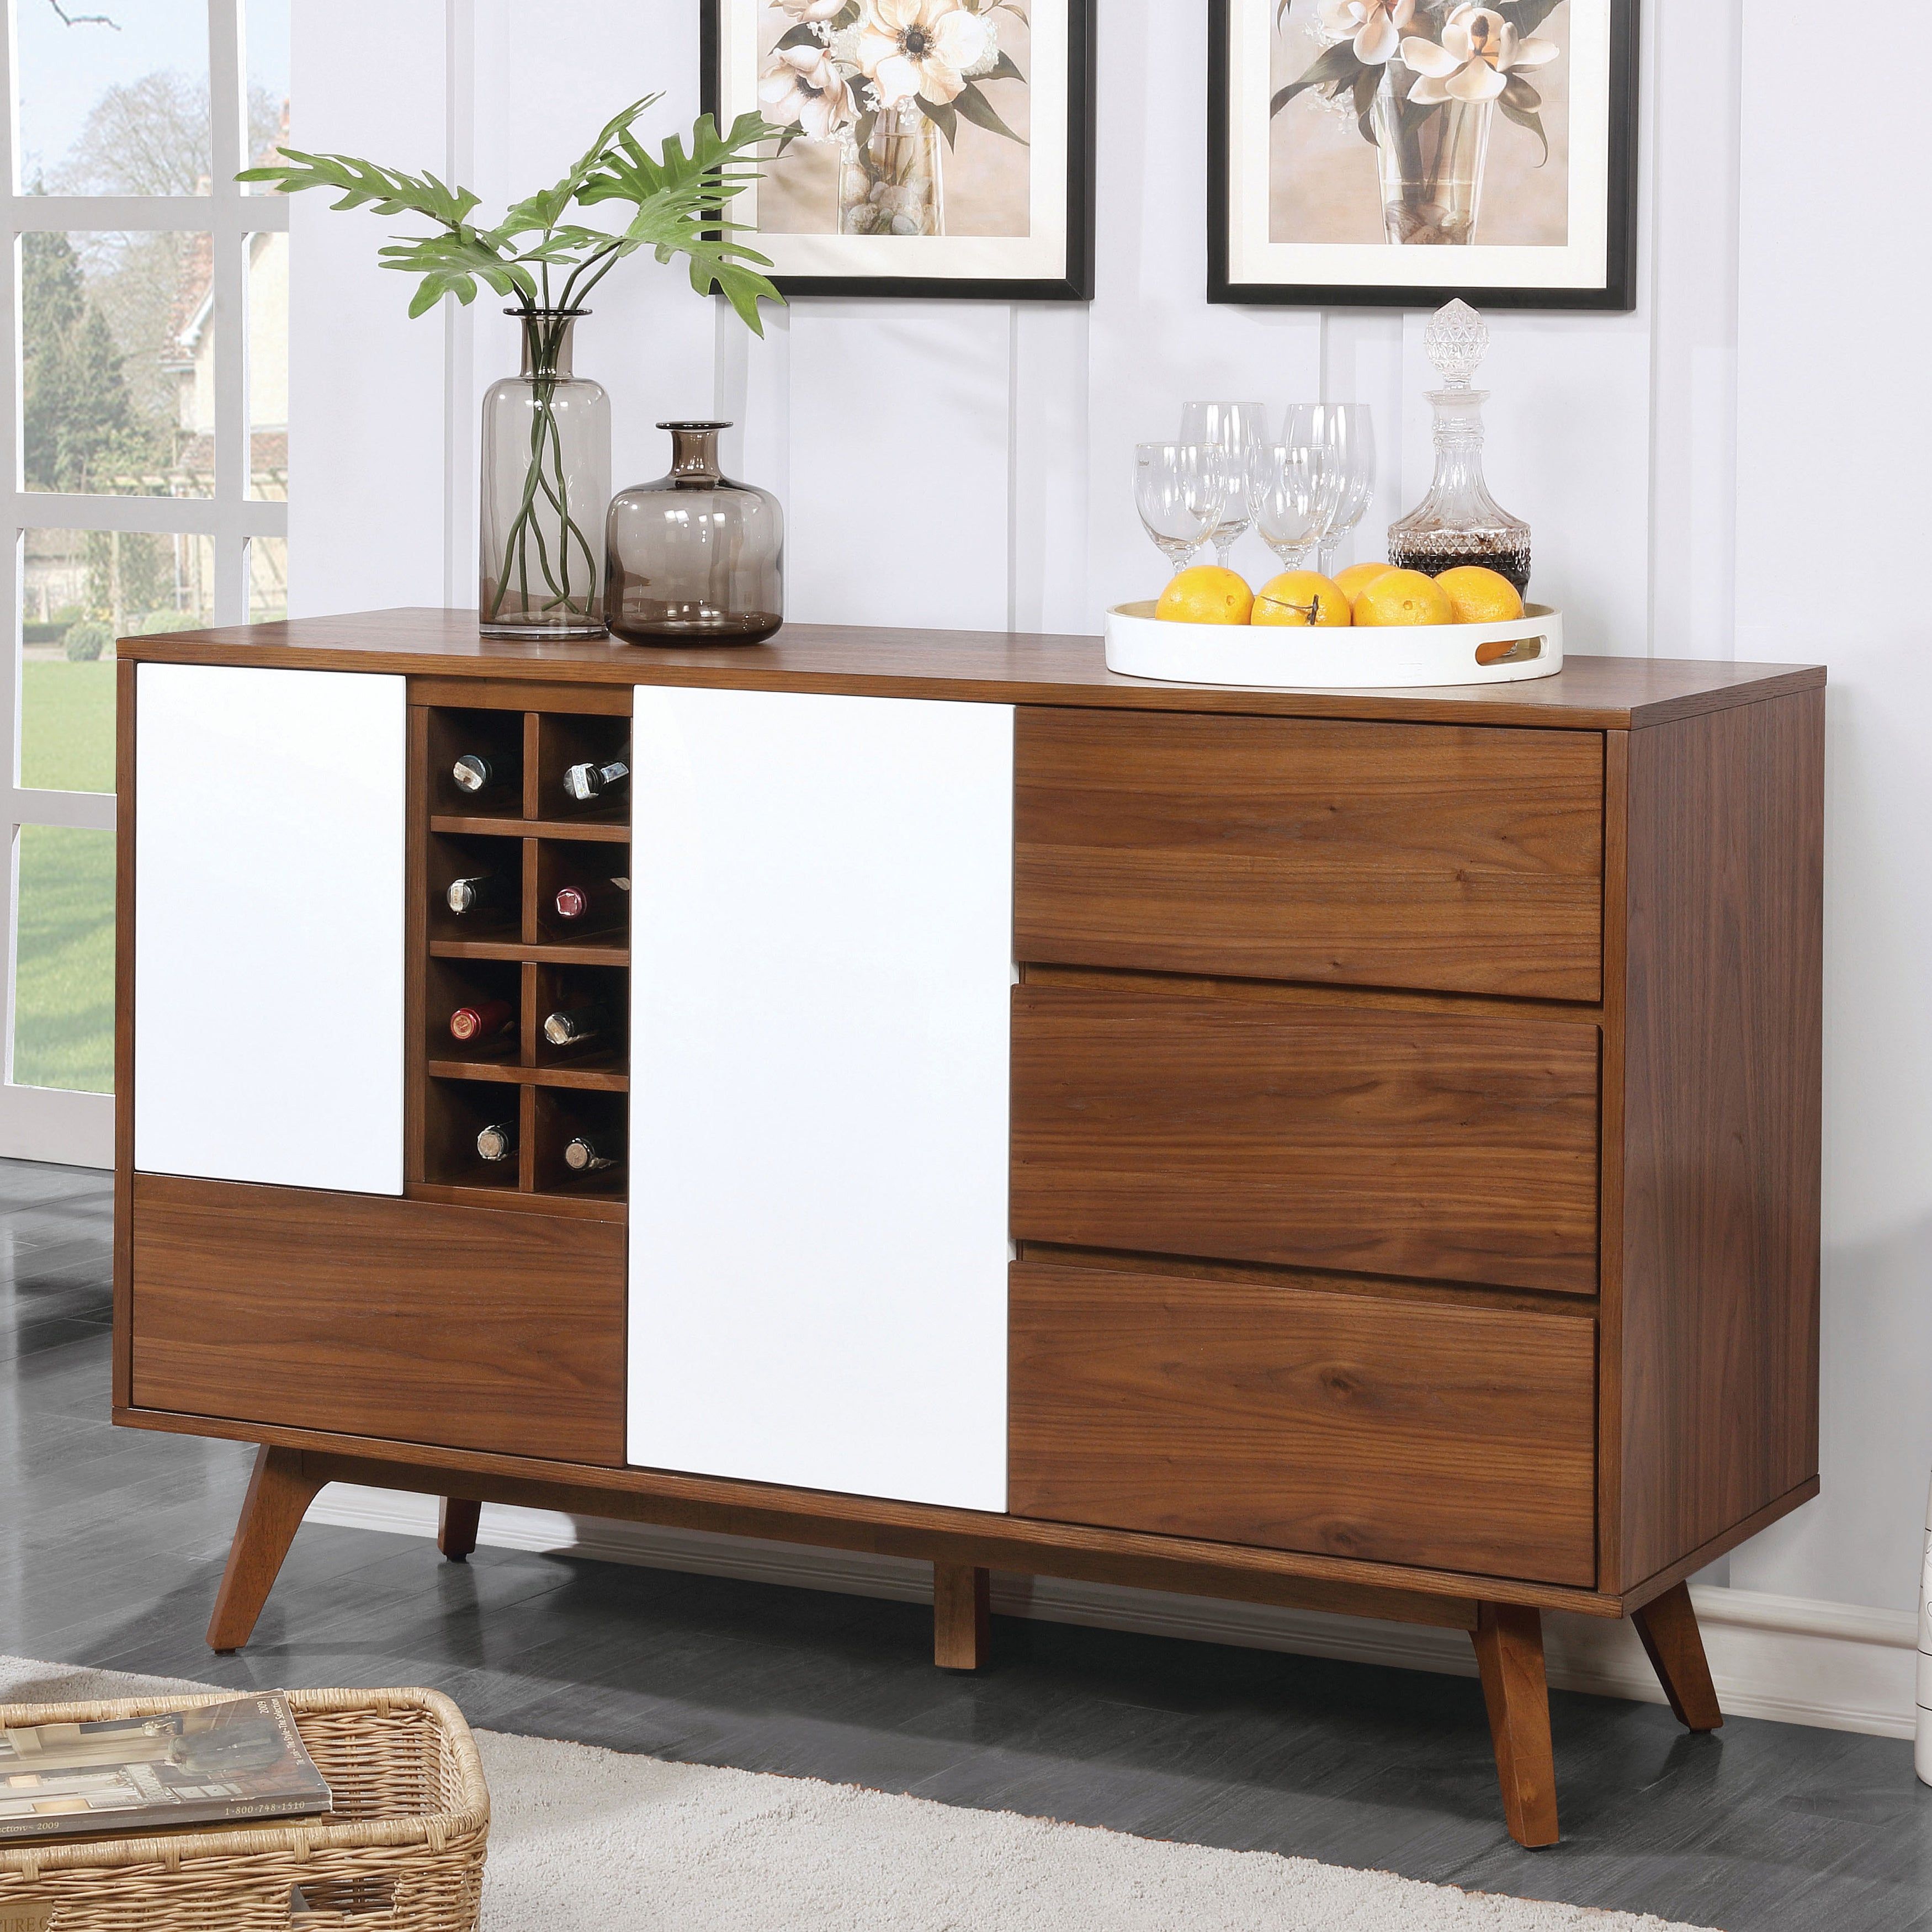 Furniture Of America Liman Mid Century Modern 2 Tone Oak/white  Multi Storage Buffet/wine Cabinet Inside Contemporary Wooden Buffets With One Side Door Storage Cabinets And Two Drawers (View 4 of 30)